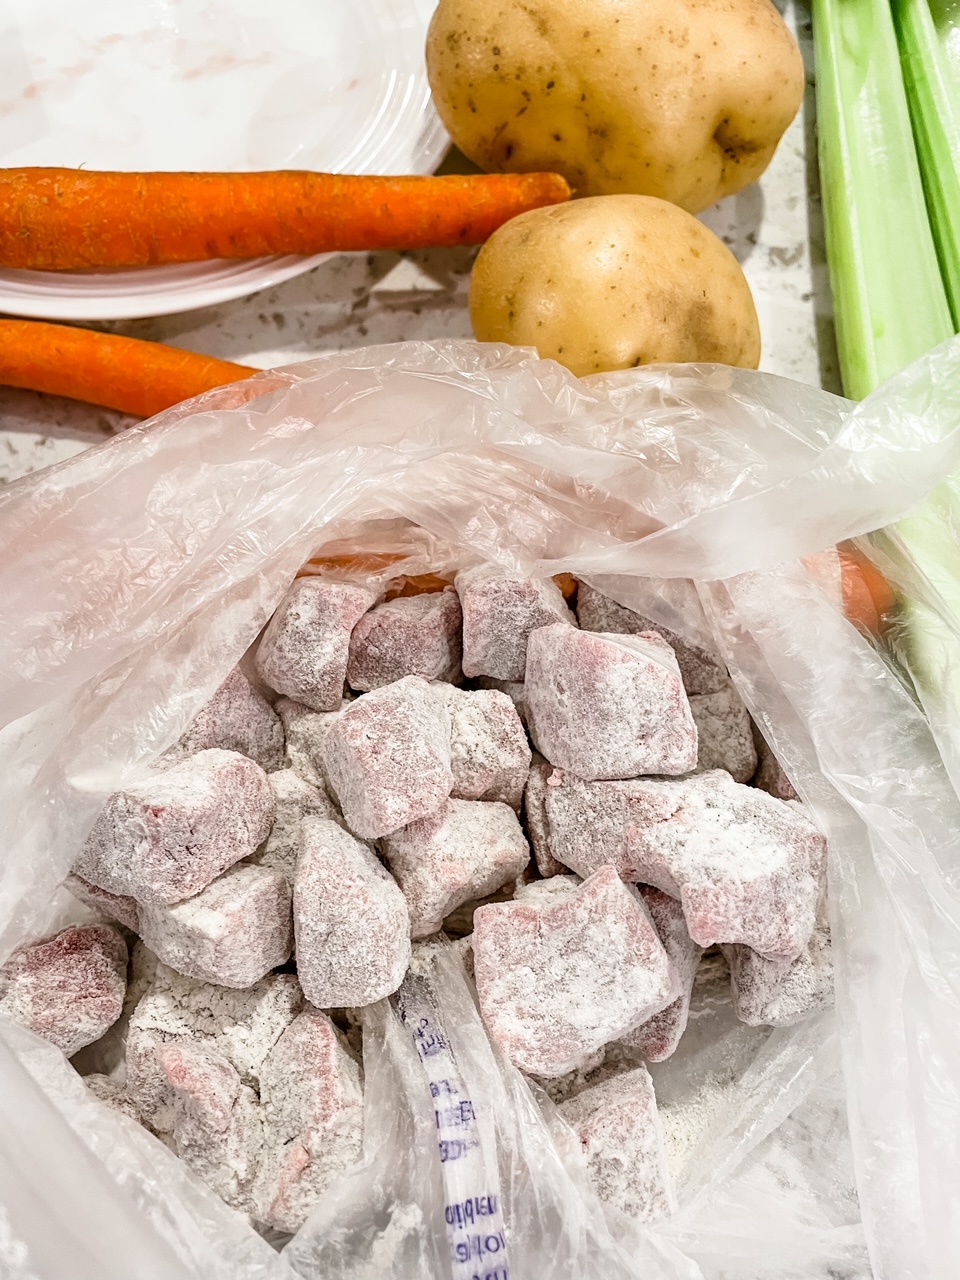 The dredged cubes of beef for the Best Irish Beef Stew with Guinness